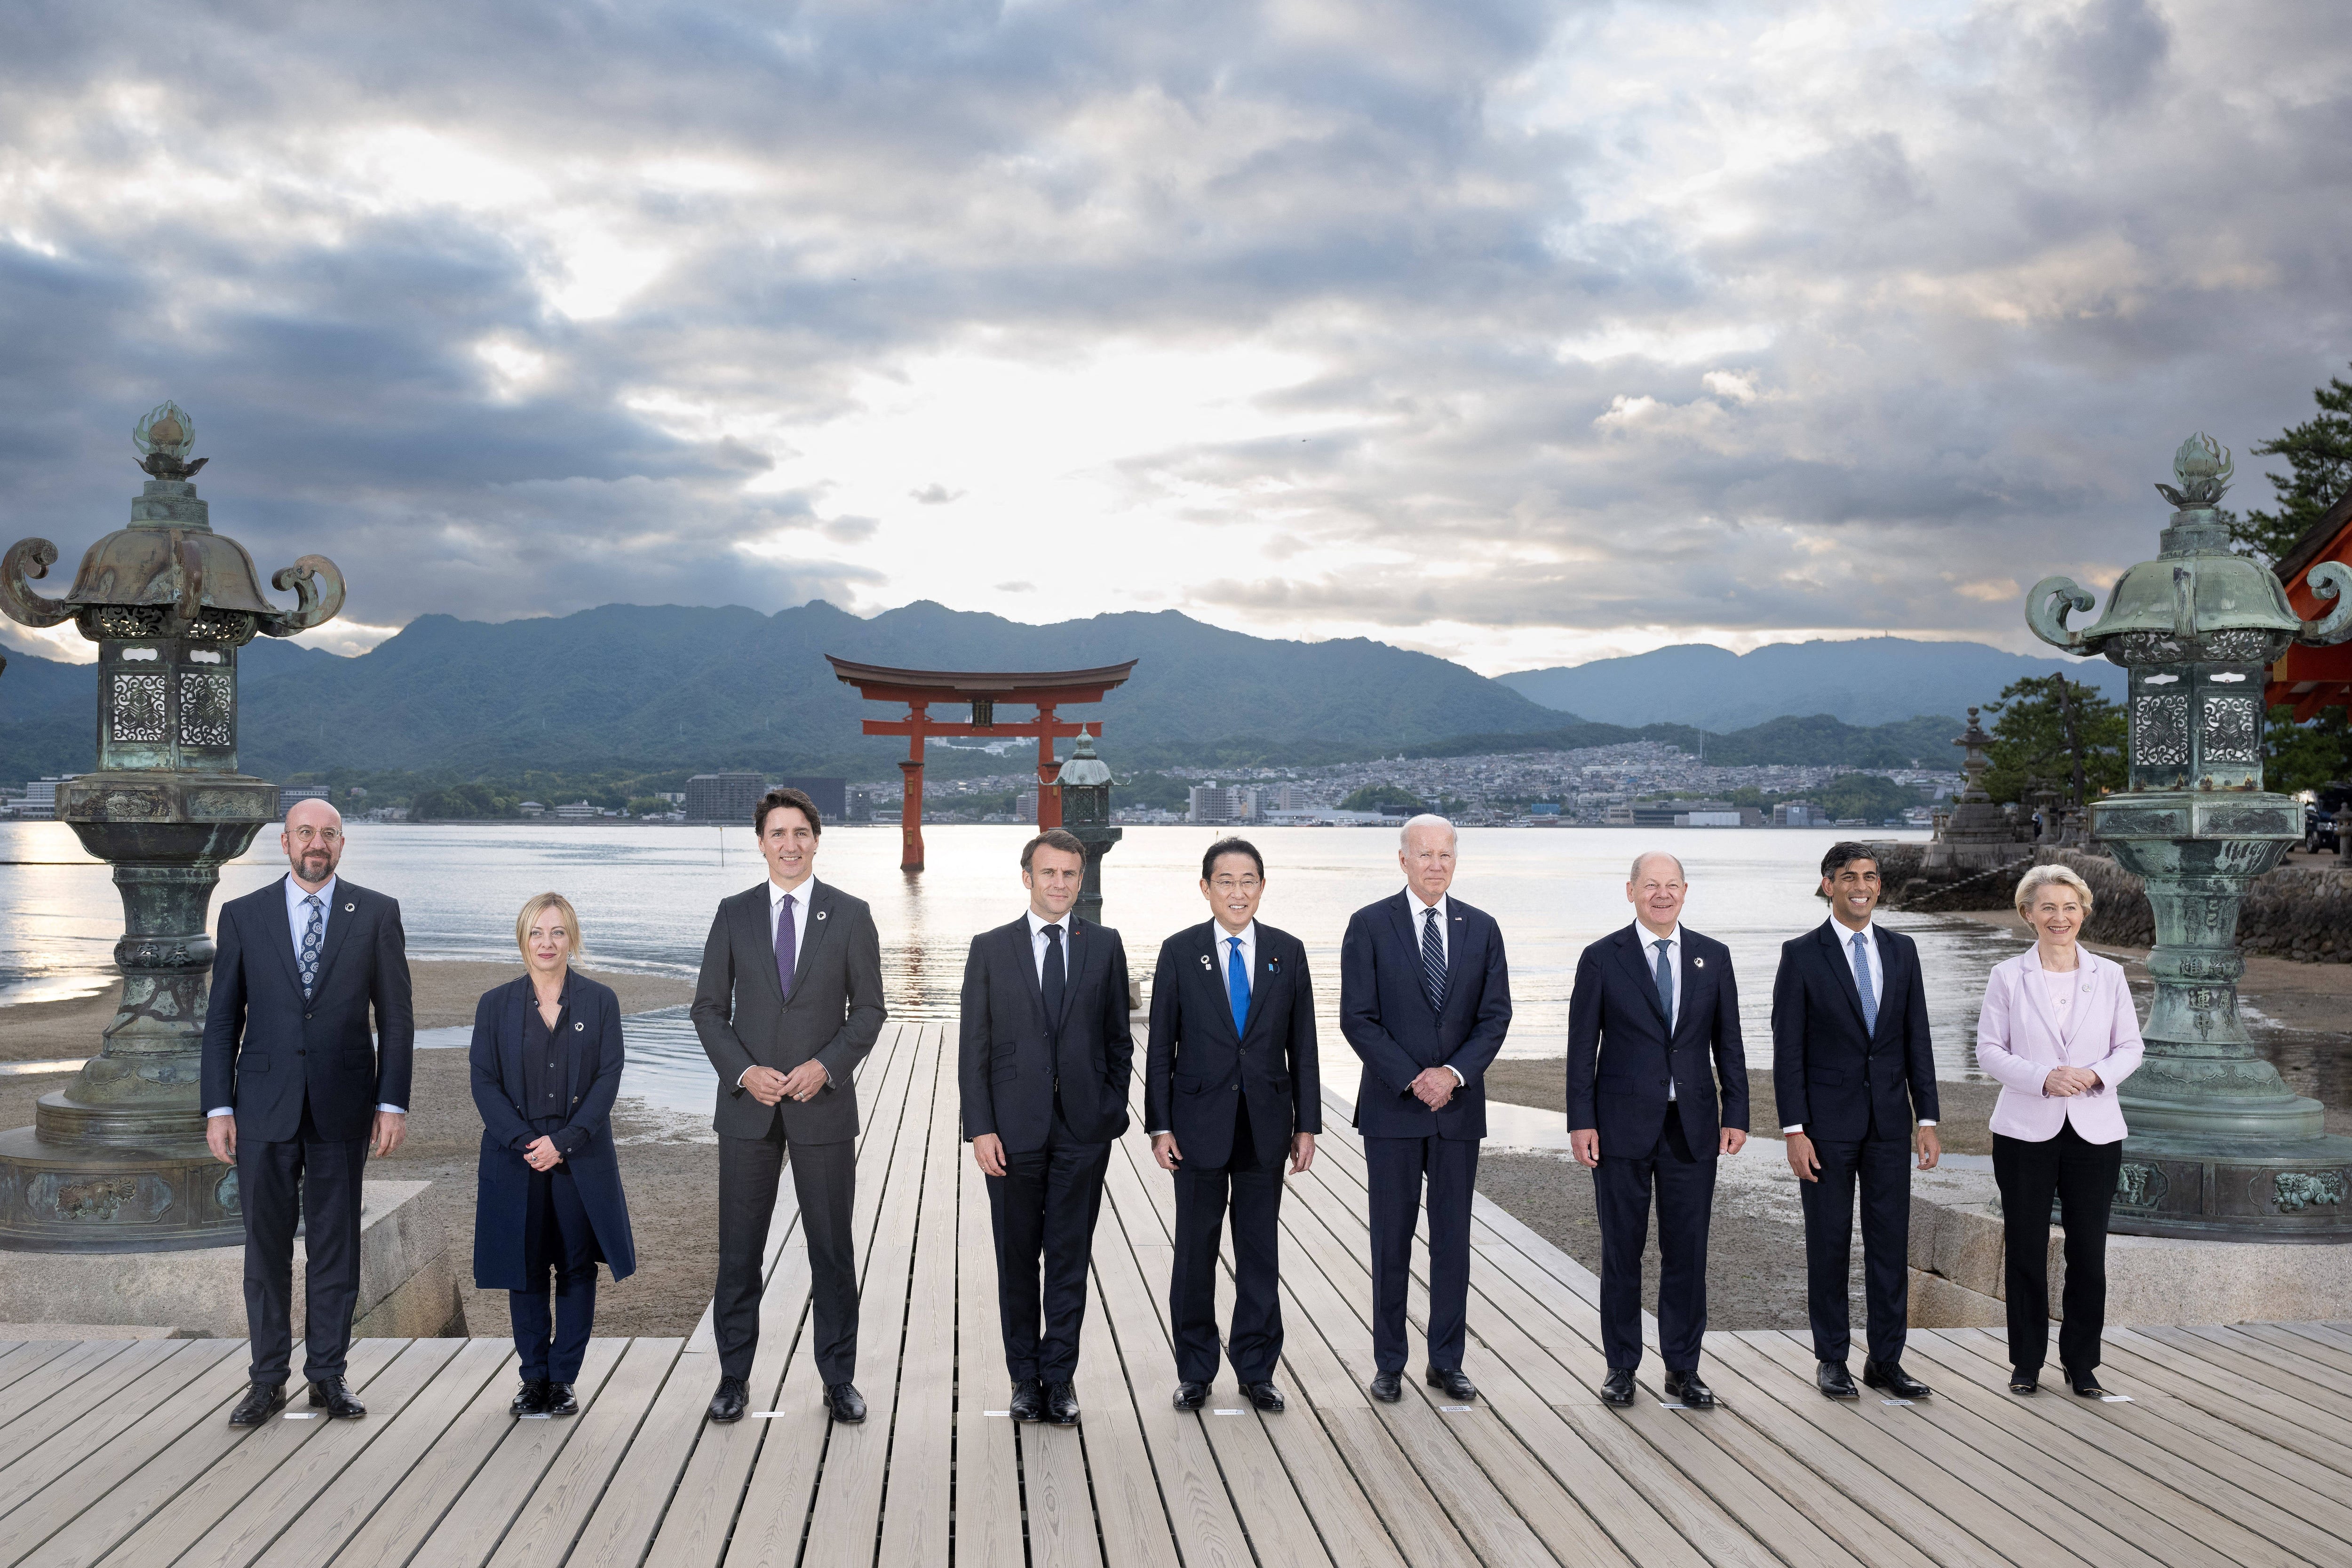 G7 Summit: 3 key points for action